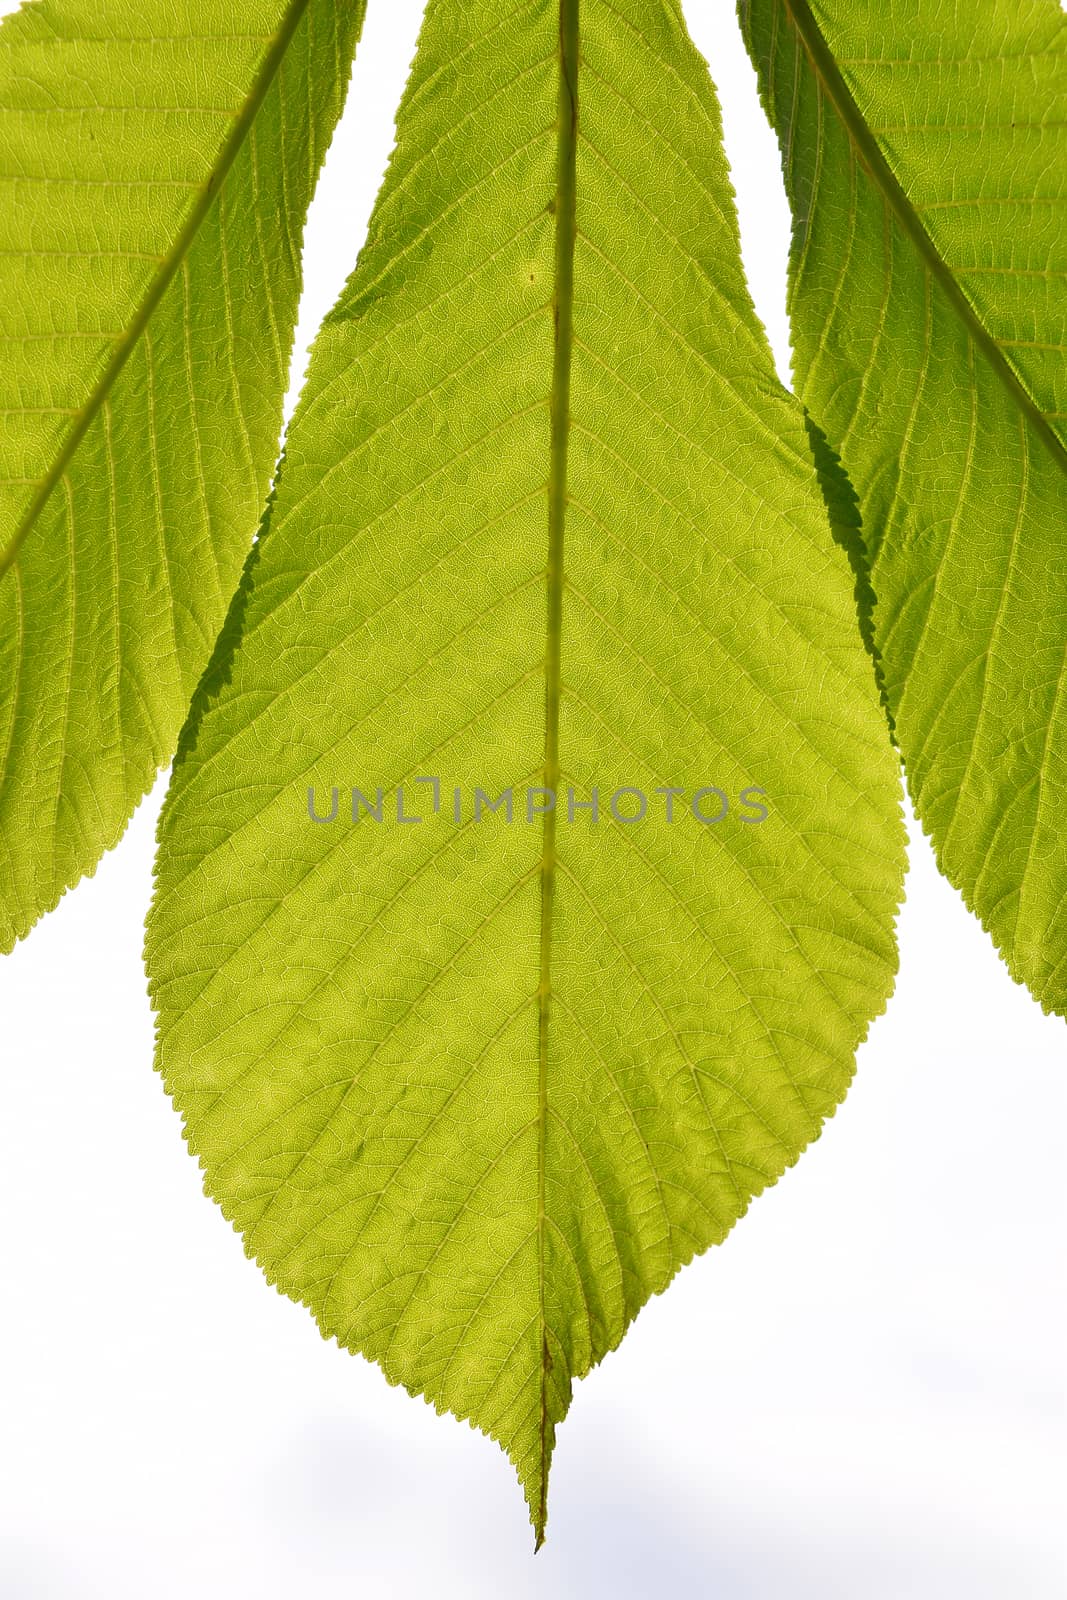 Horse chestnut translucent green leave in back lighting on white by BreakingTheWalls